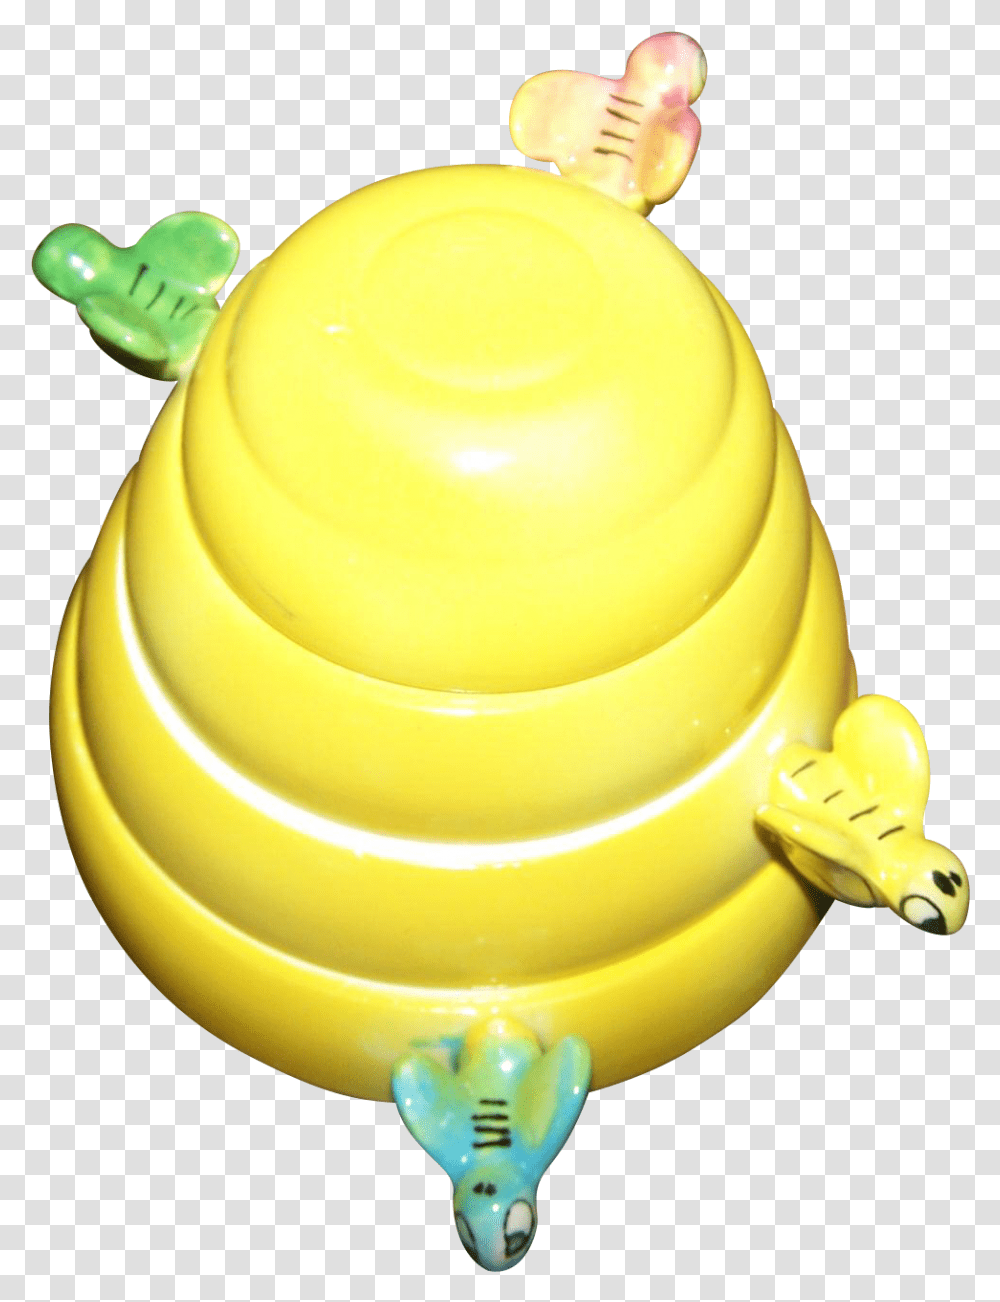 Vintage Bumble Bee Hive Stacking Ceramic Measuring Balloon, Food, Toy, Bowl, Plastic Transparent Png